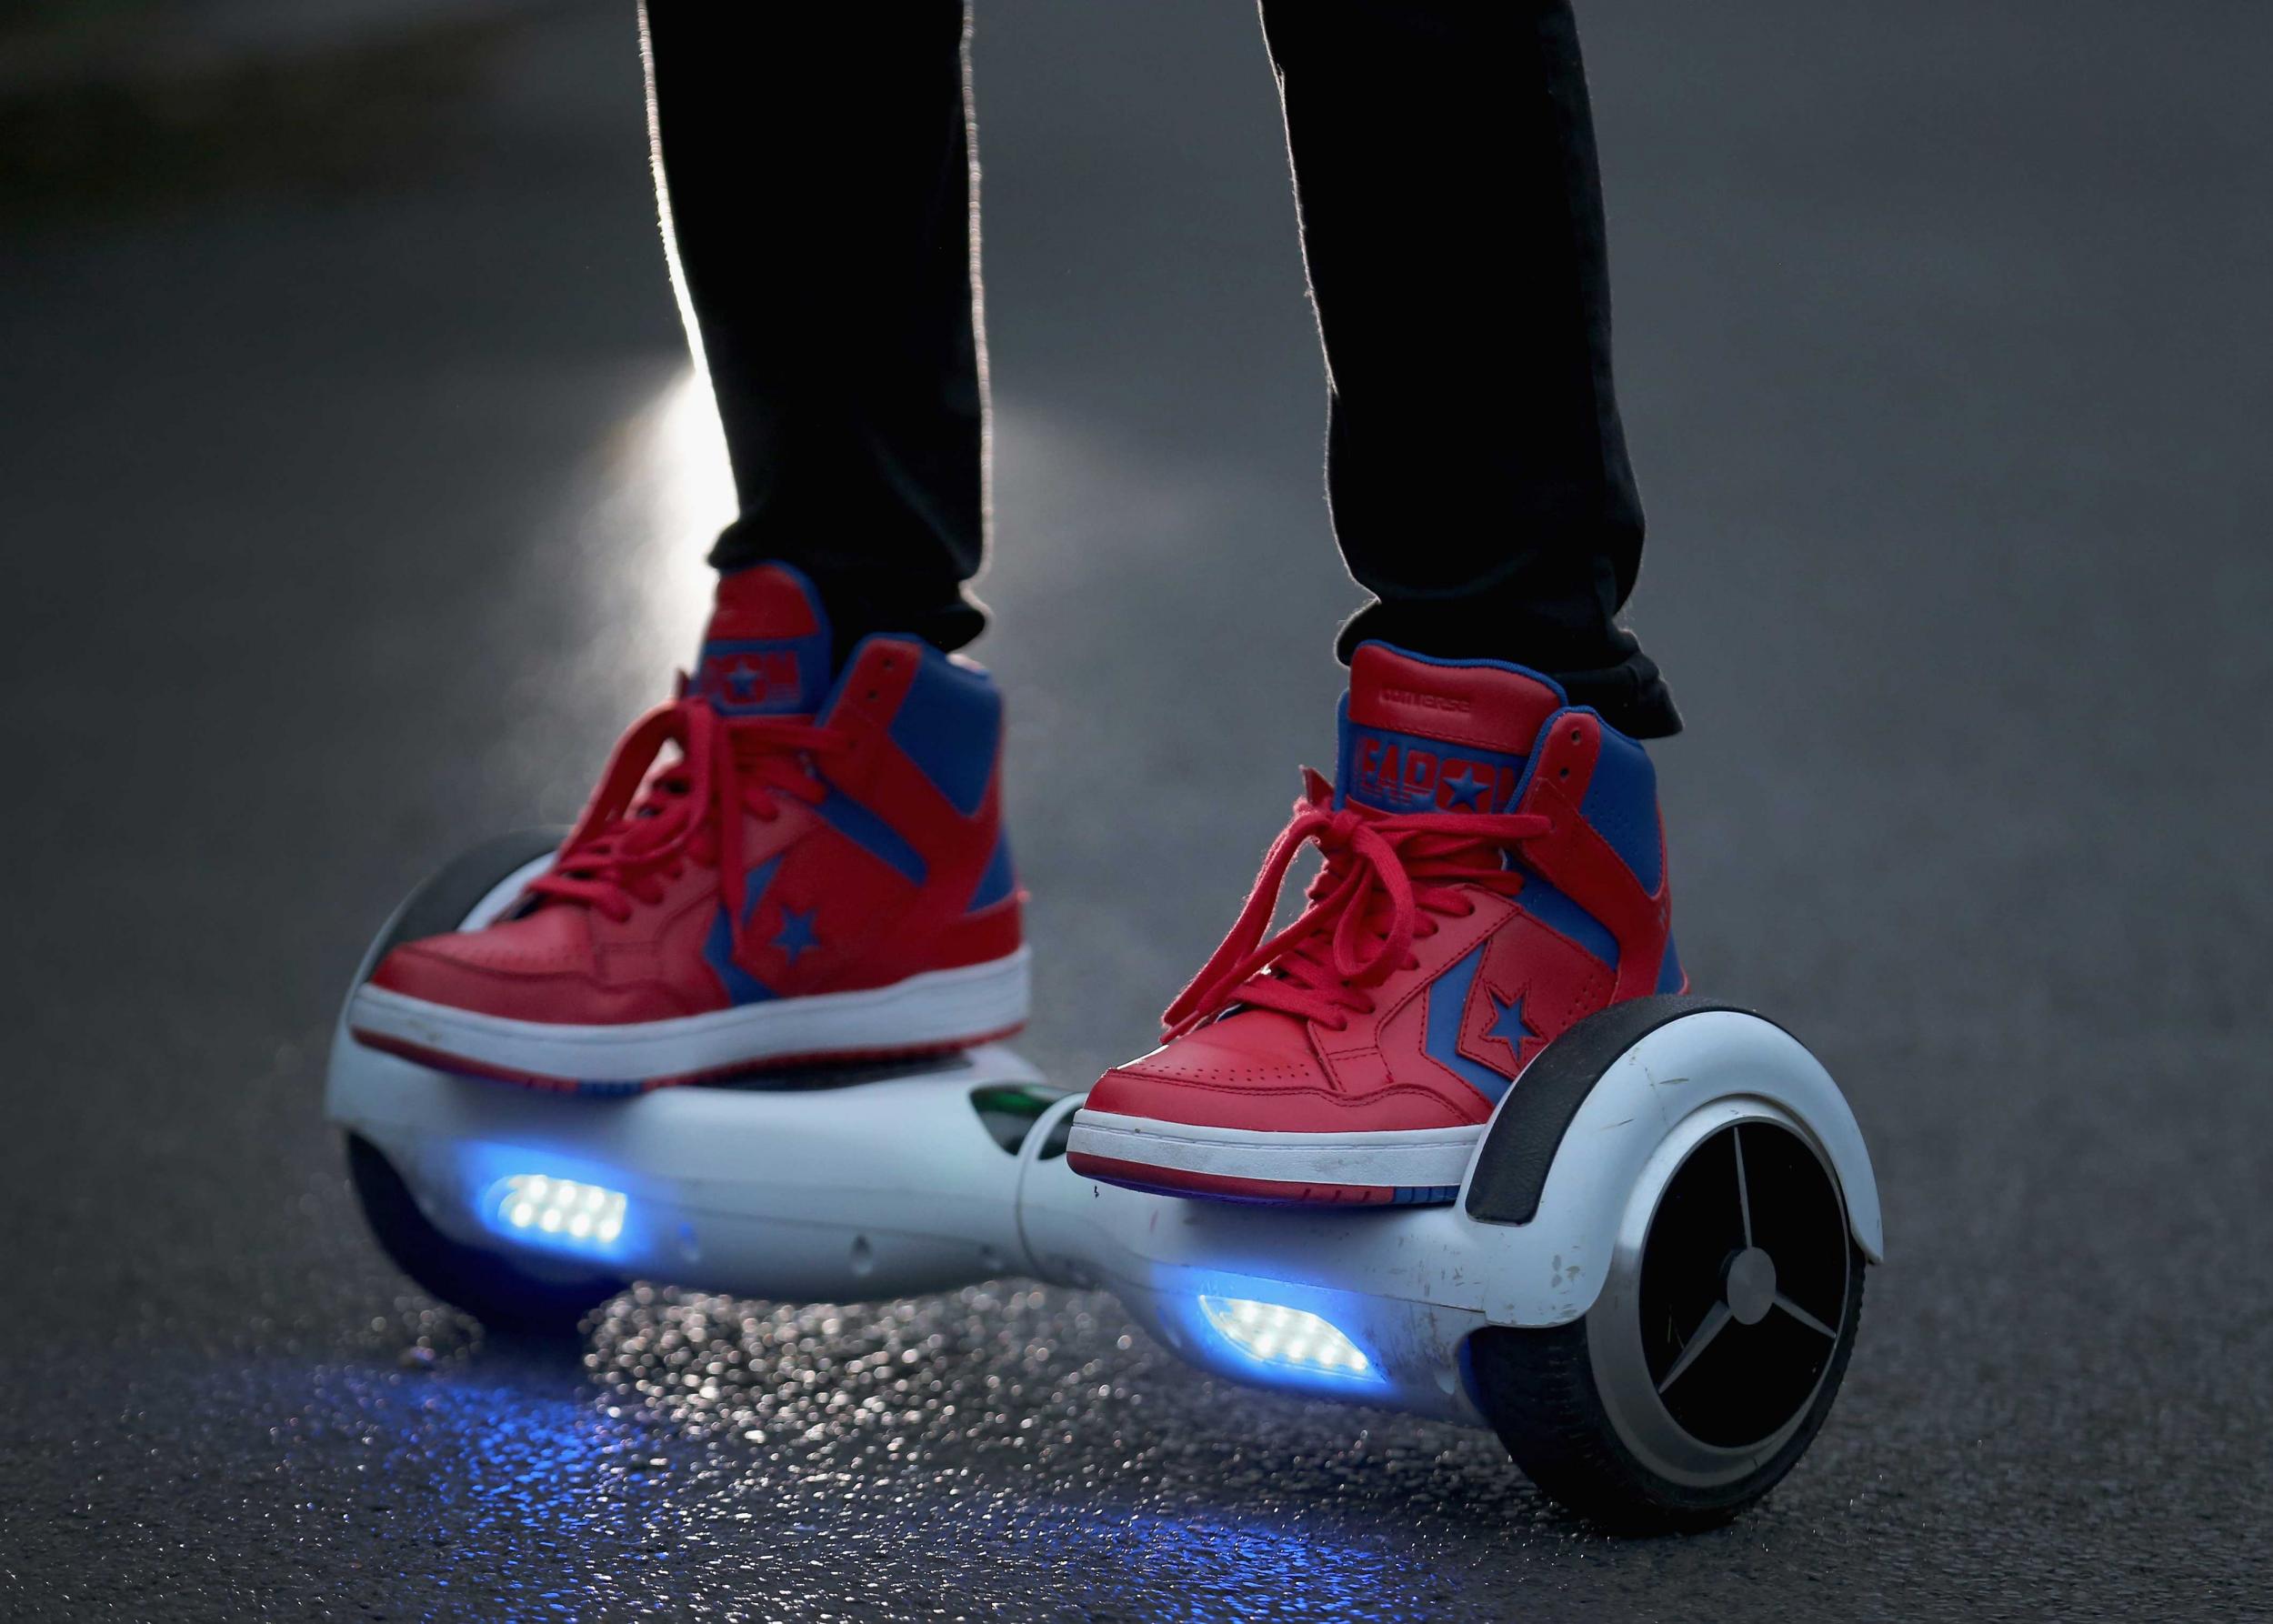 Singapore Airlines has banned hoverboards on all of its aircraft